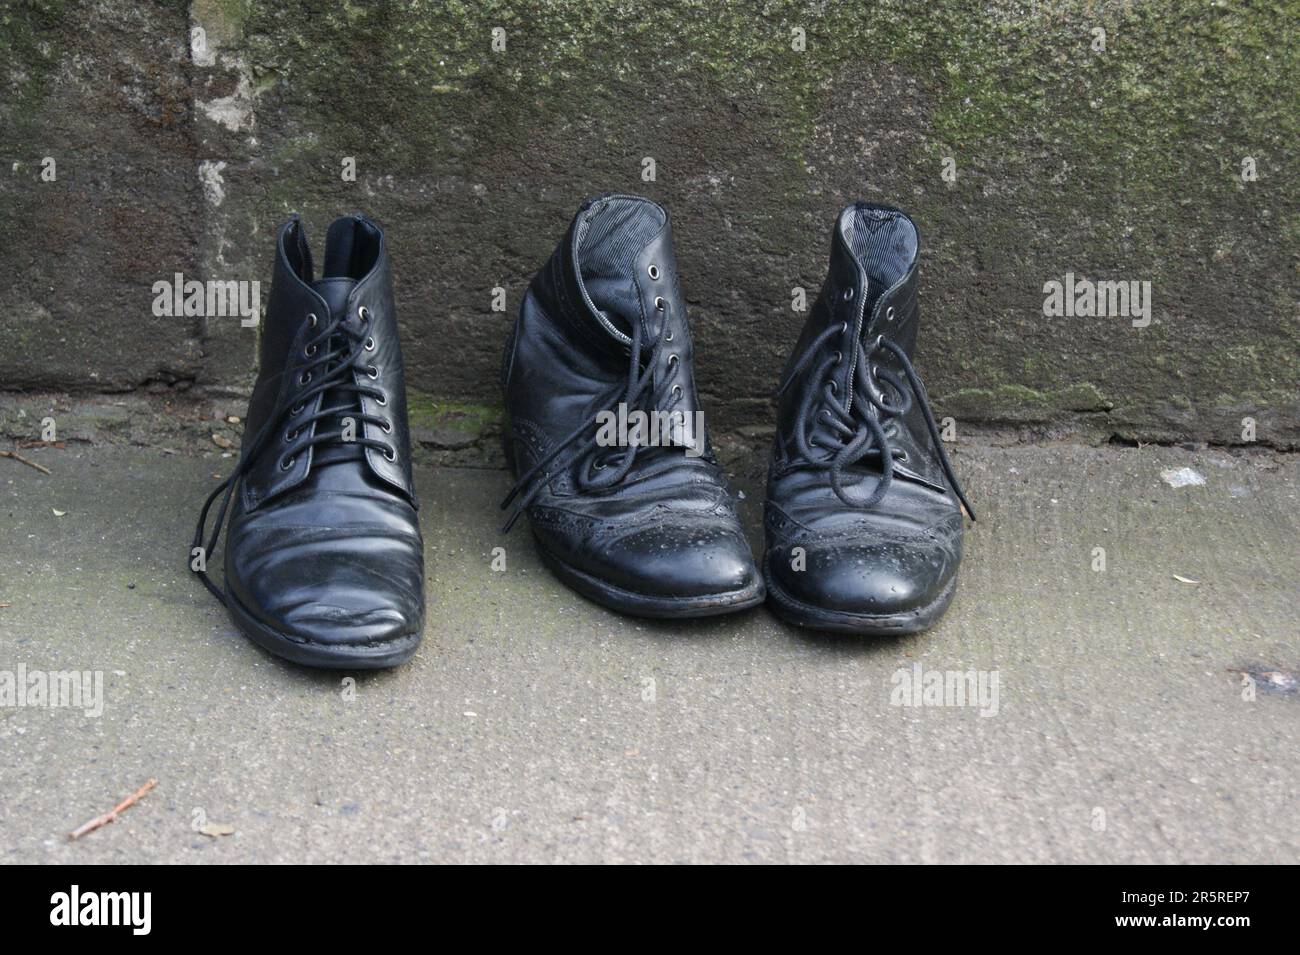 Old black leather shoes on the street. Black men's shoes. Stock Photo